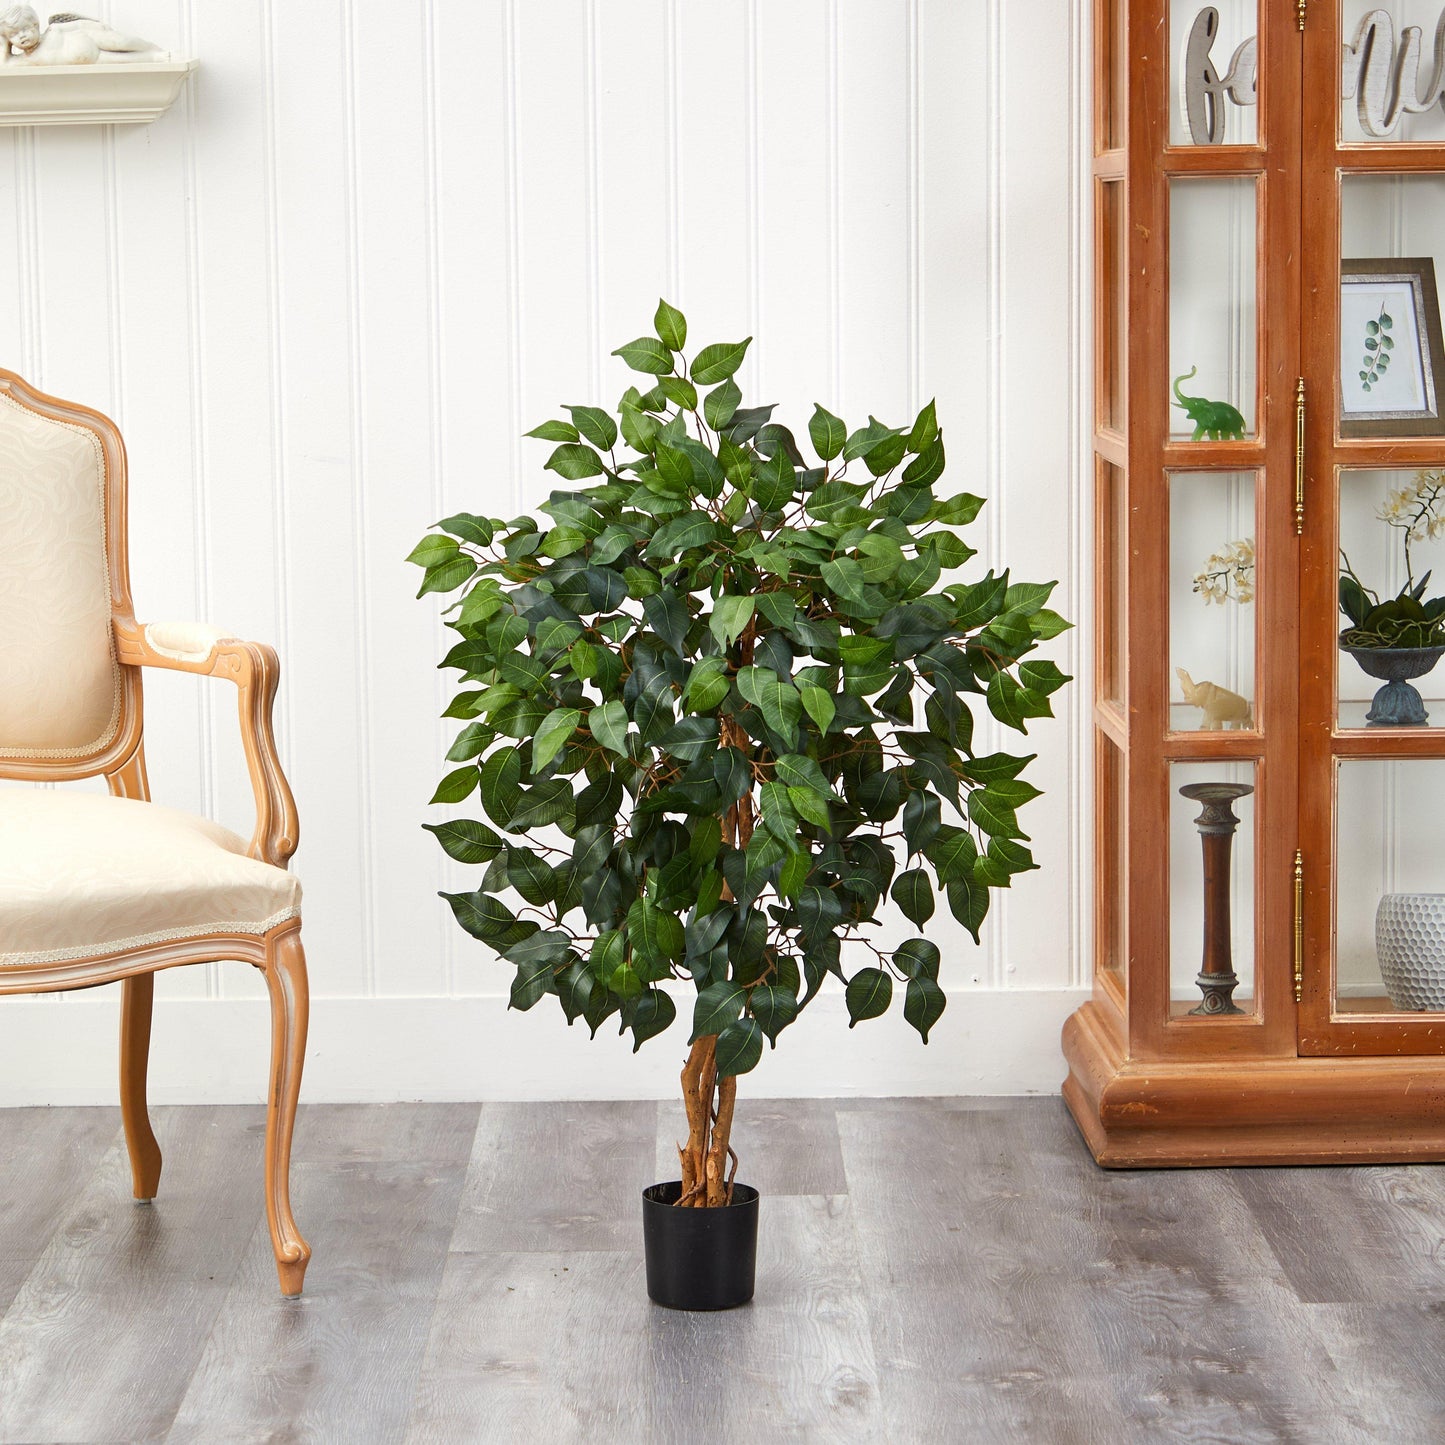 3' Ficus Silk Tree by Nearly Natural